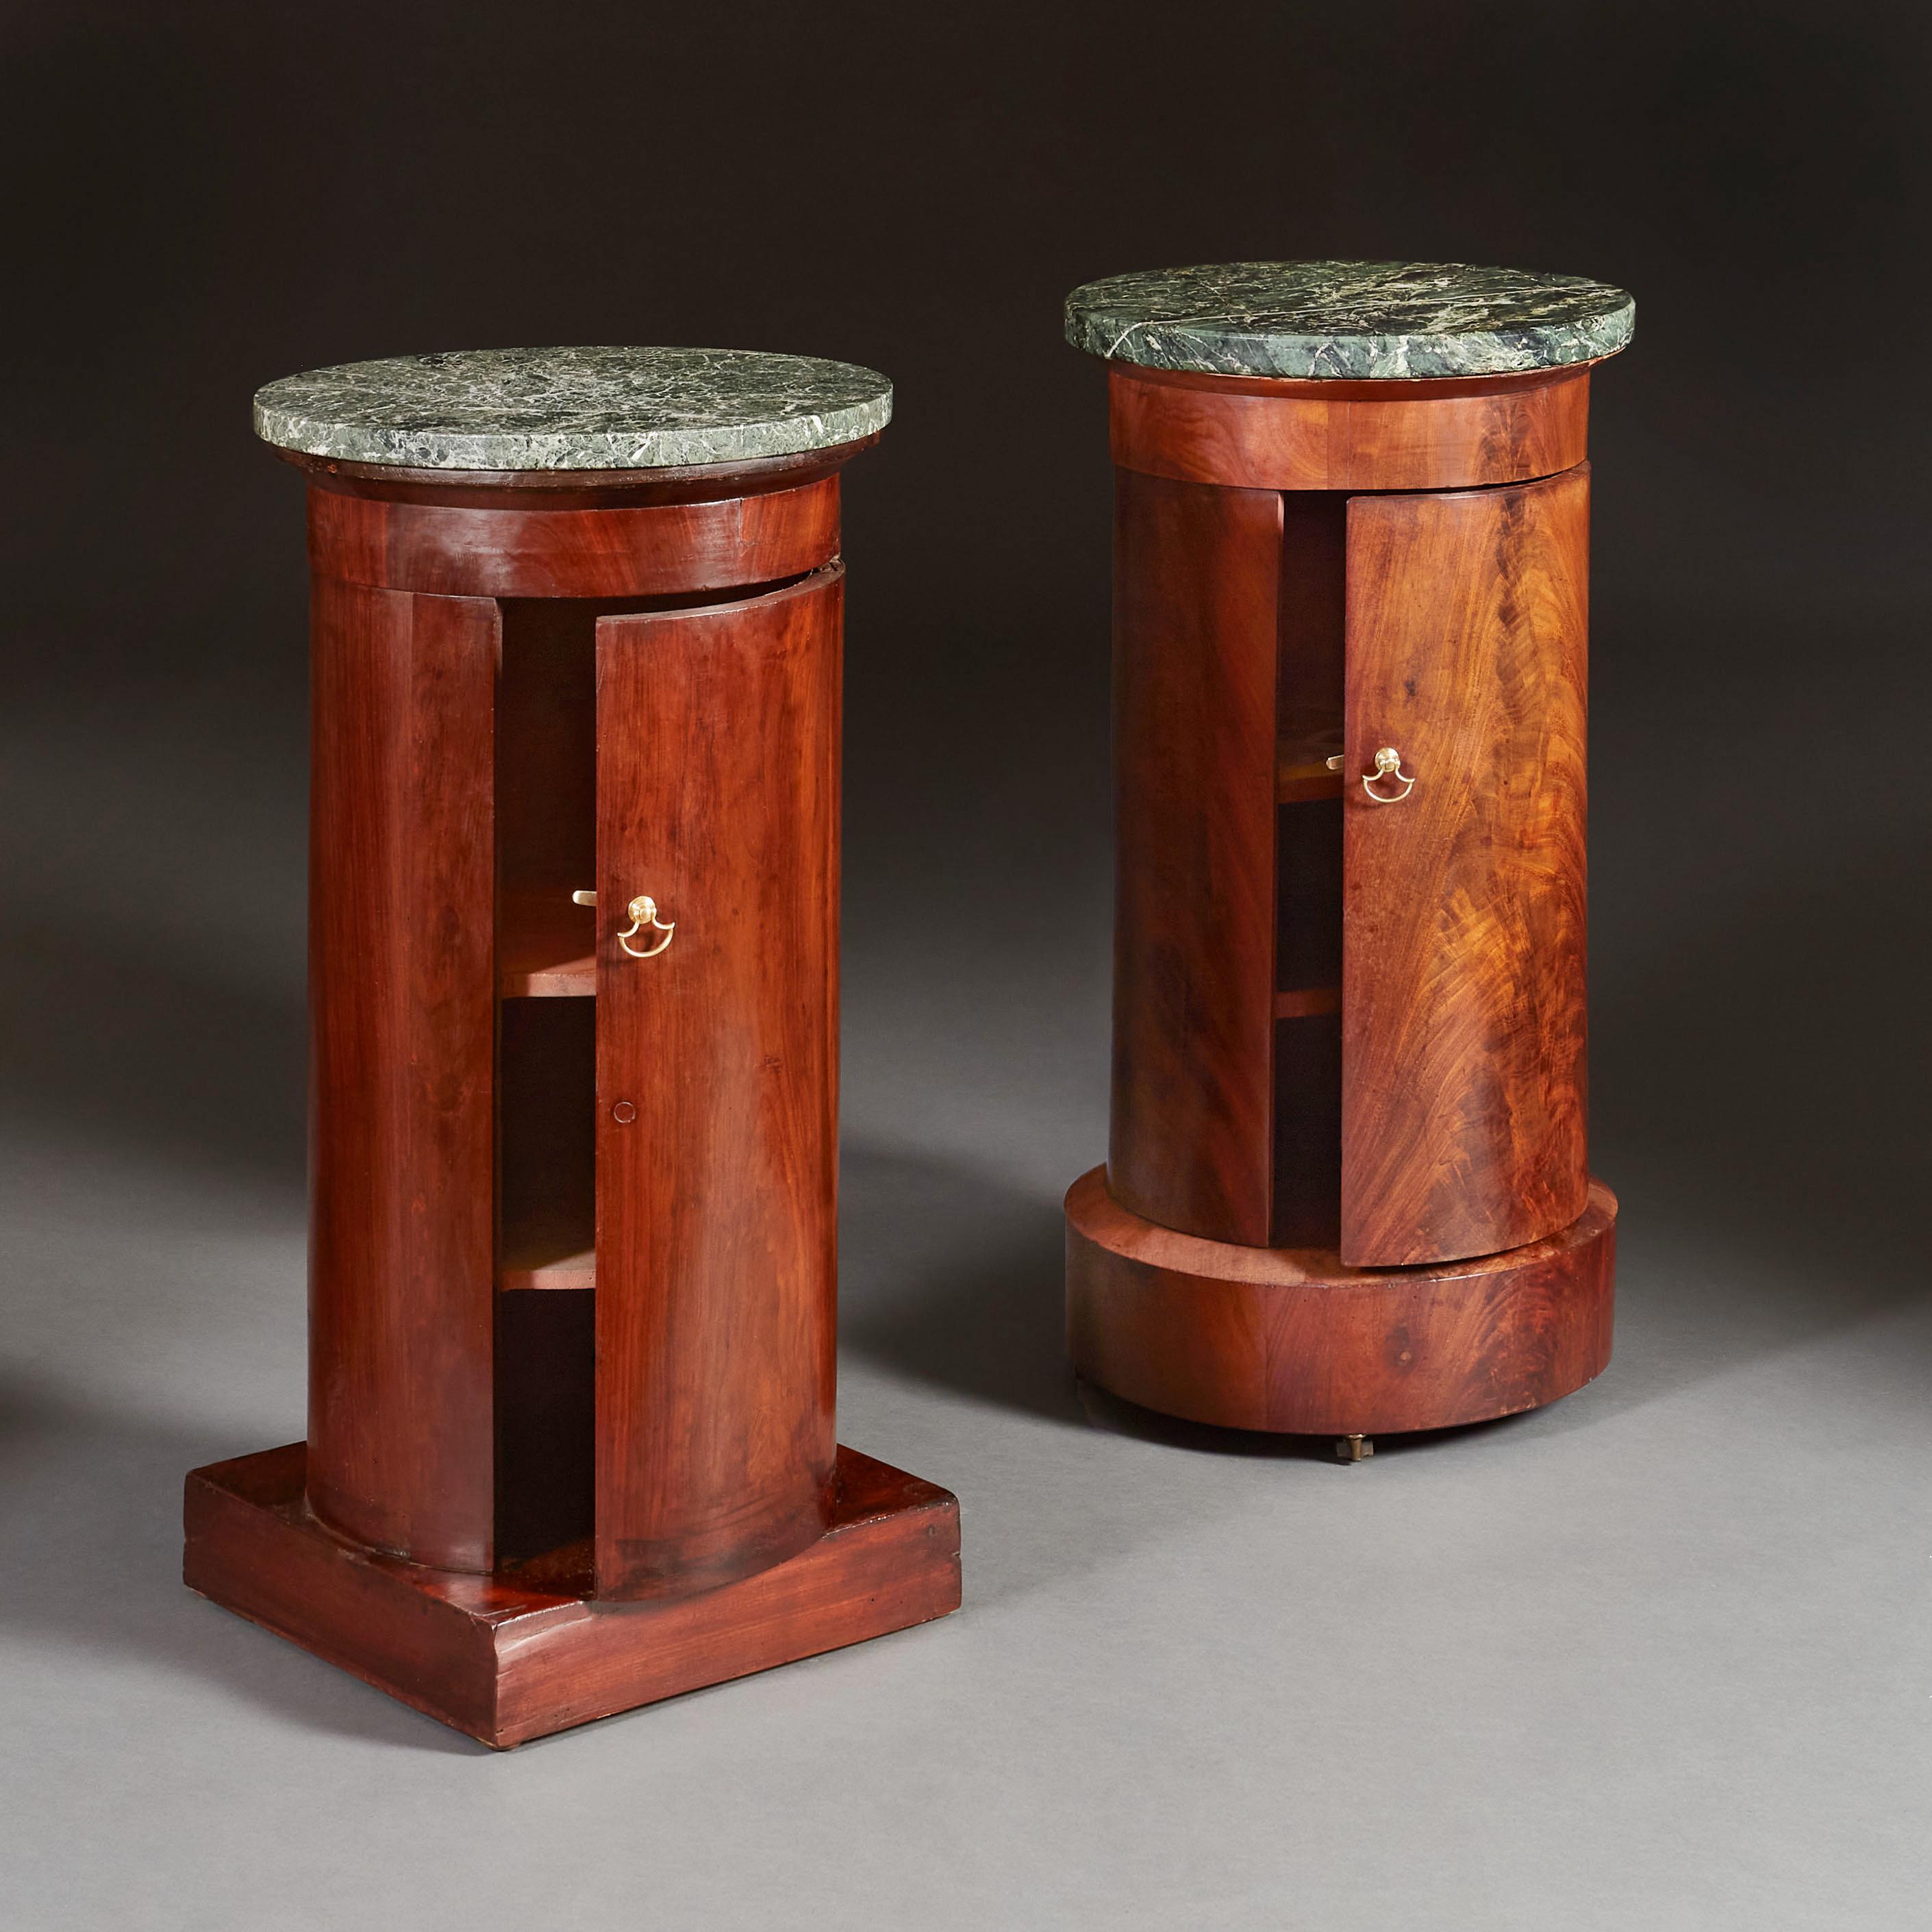 A matched pair of Empire mahogany pedestal cupboards of cylindrical form, both with green marble tops, and two shelves to the interior. One with circular plinth base and castors, one with square plinth base. With Brass handles.

Circular base